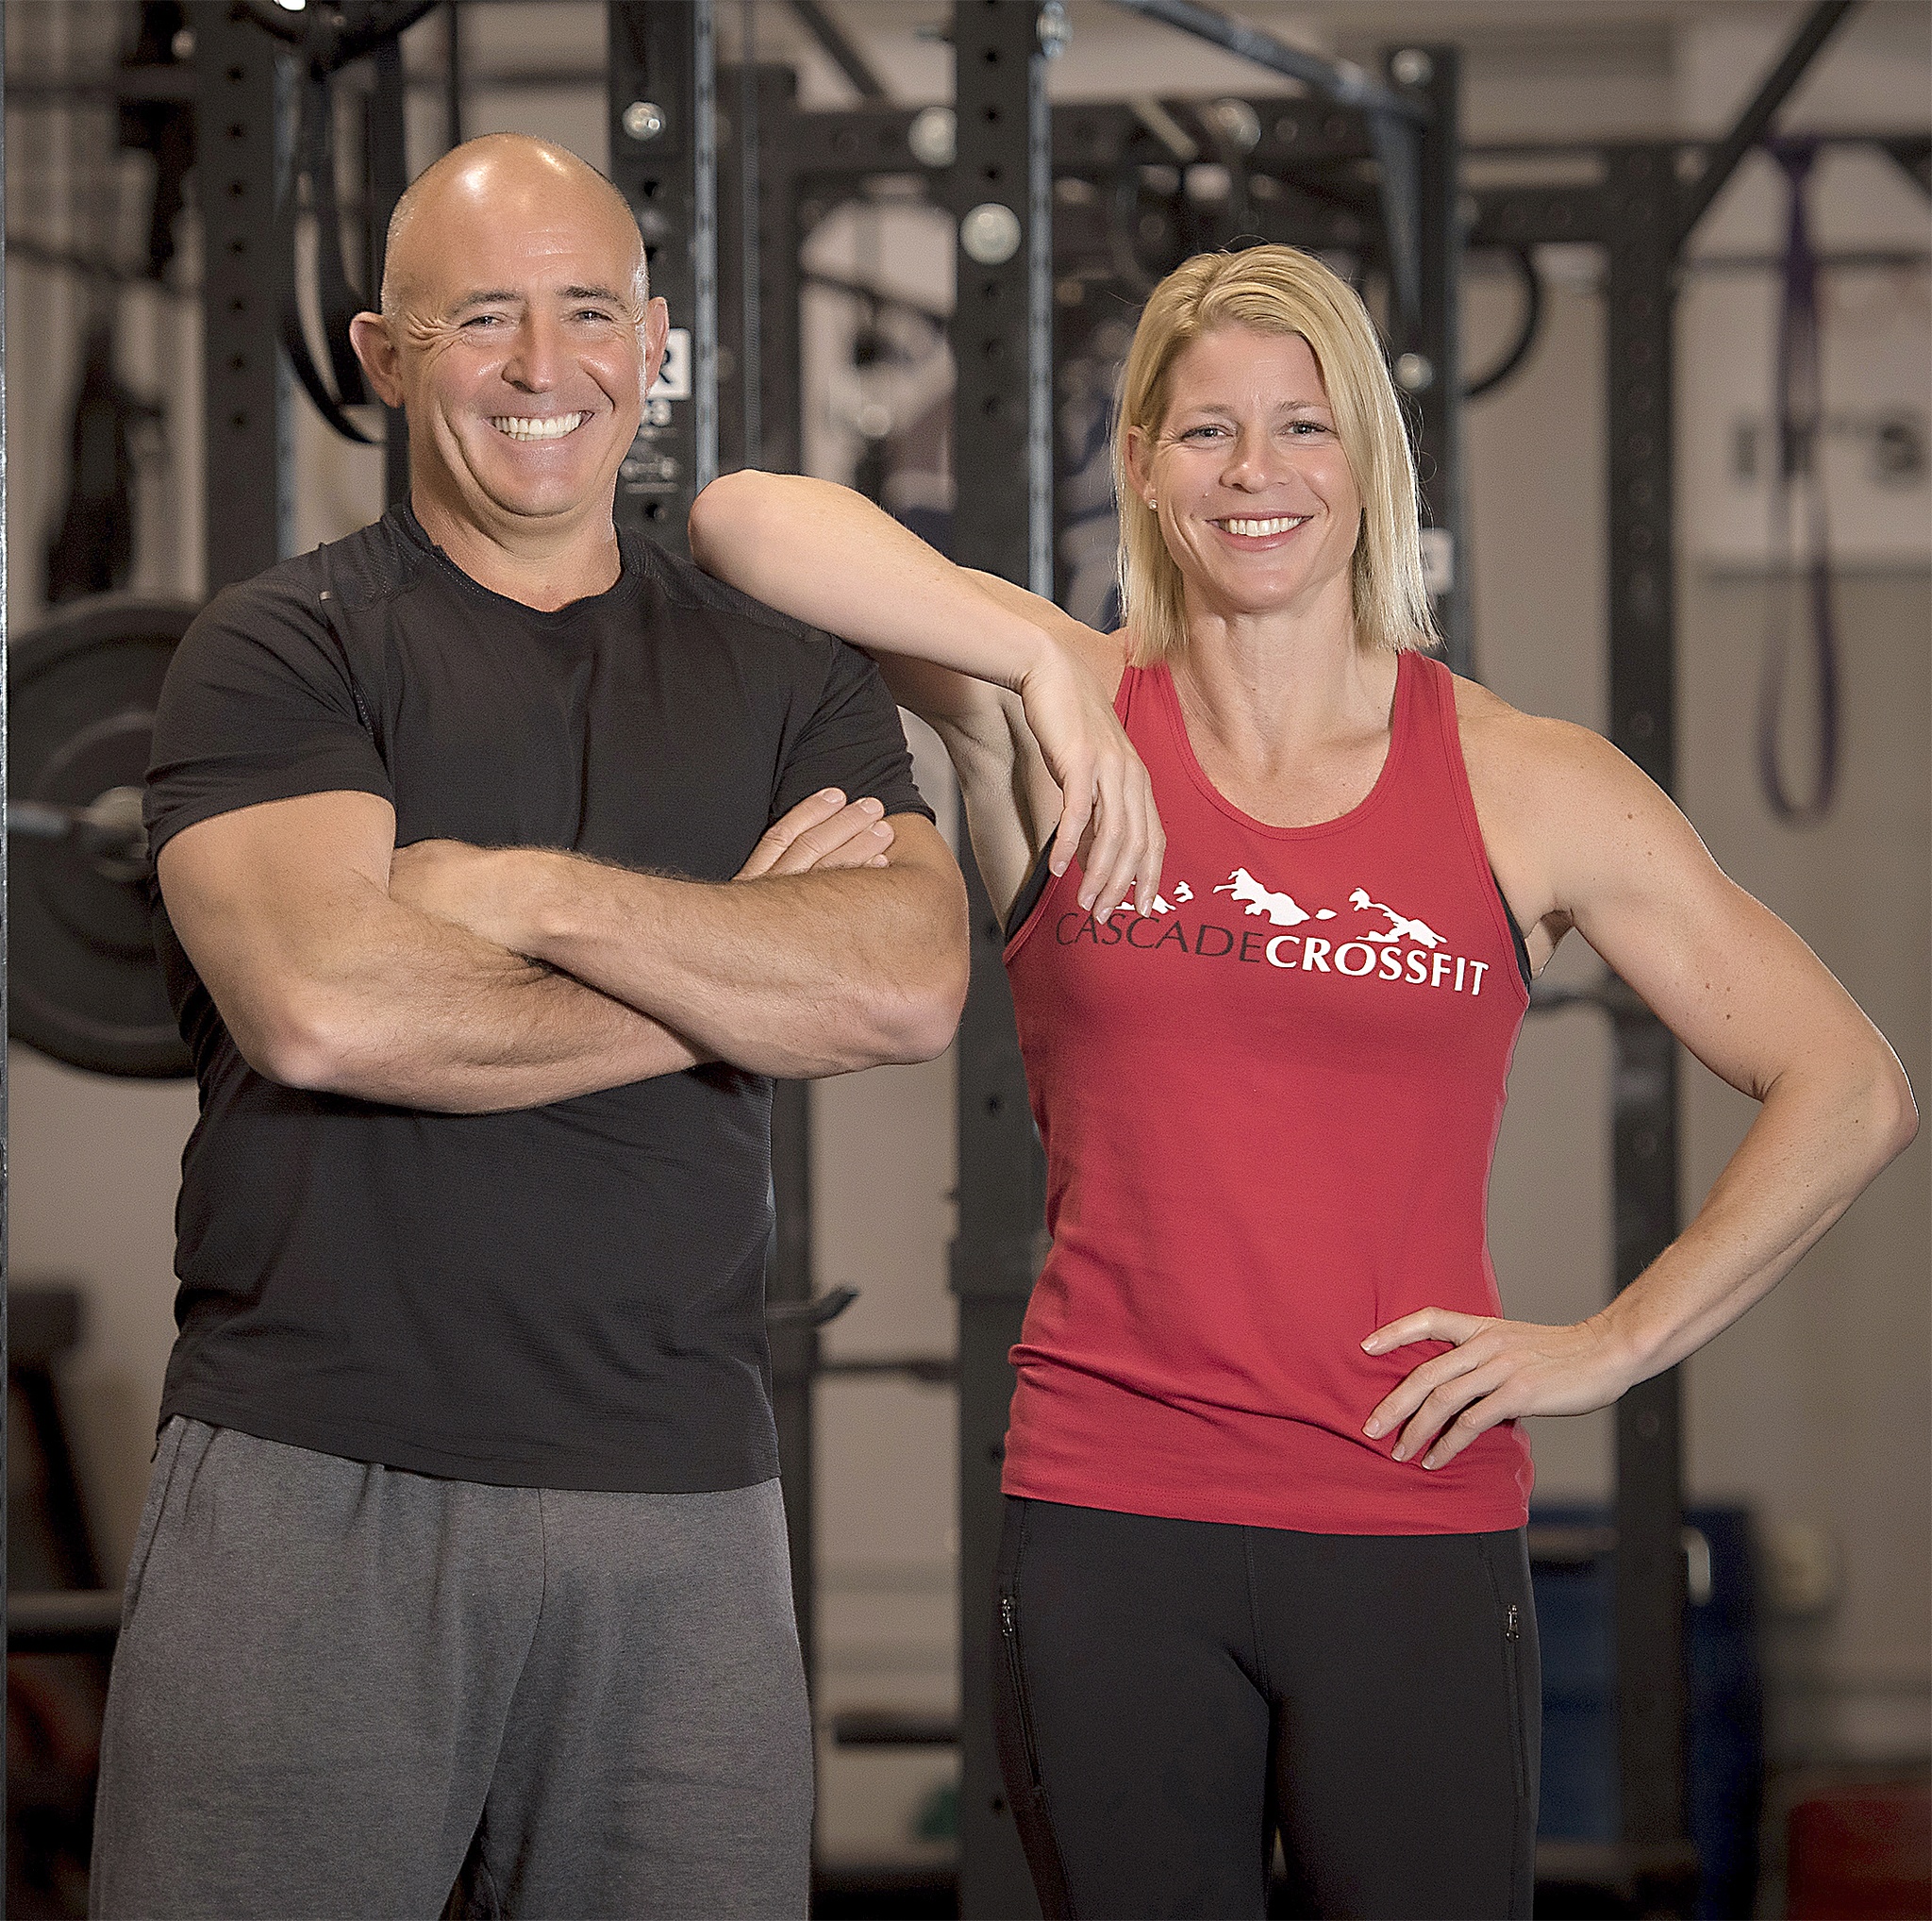 Patrick Sprague and Trina Huarte have qualified to compete at the world championship CrossFit Games July 19 to 21 in Carson